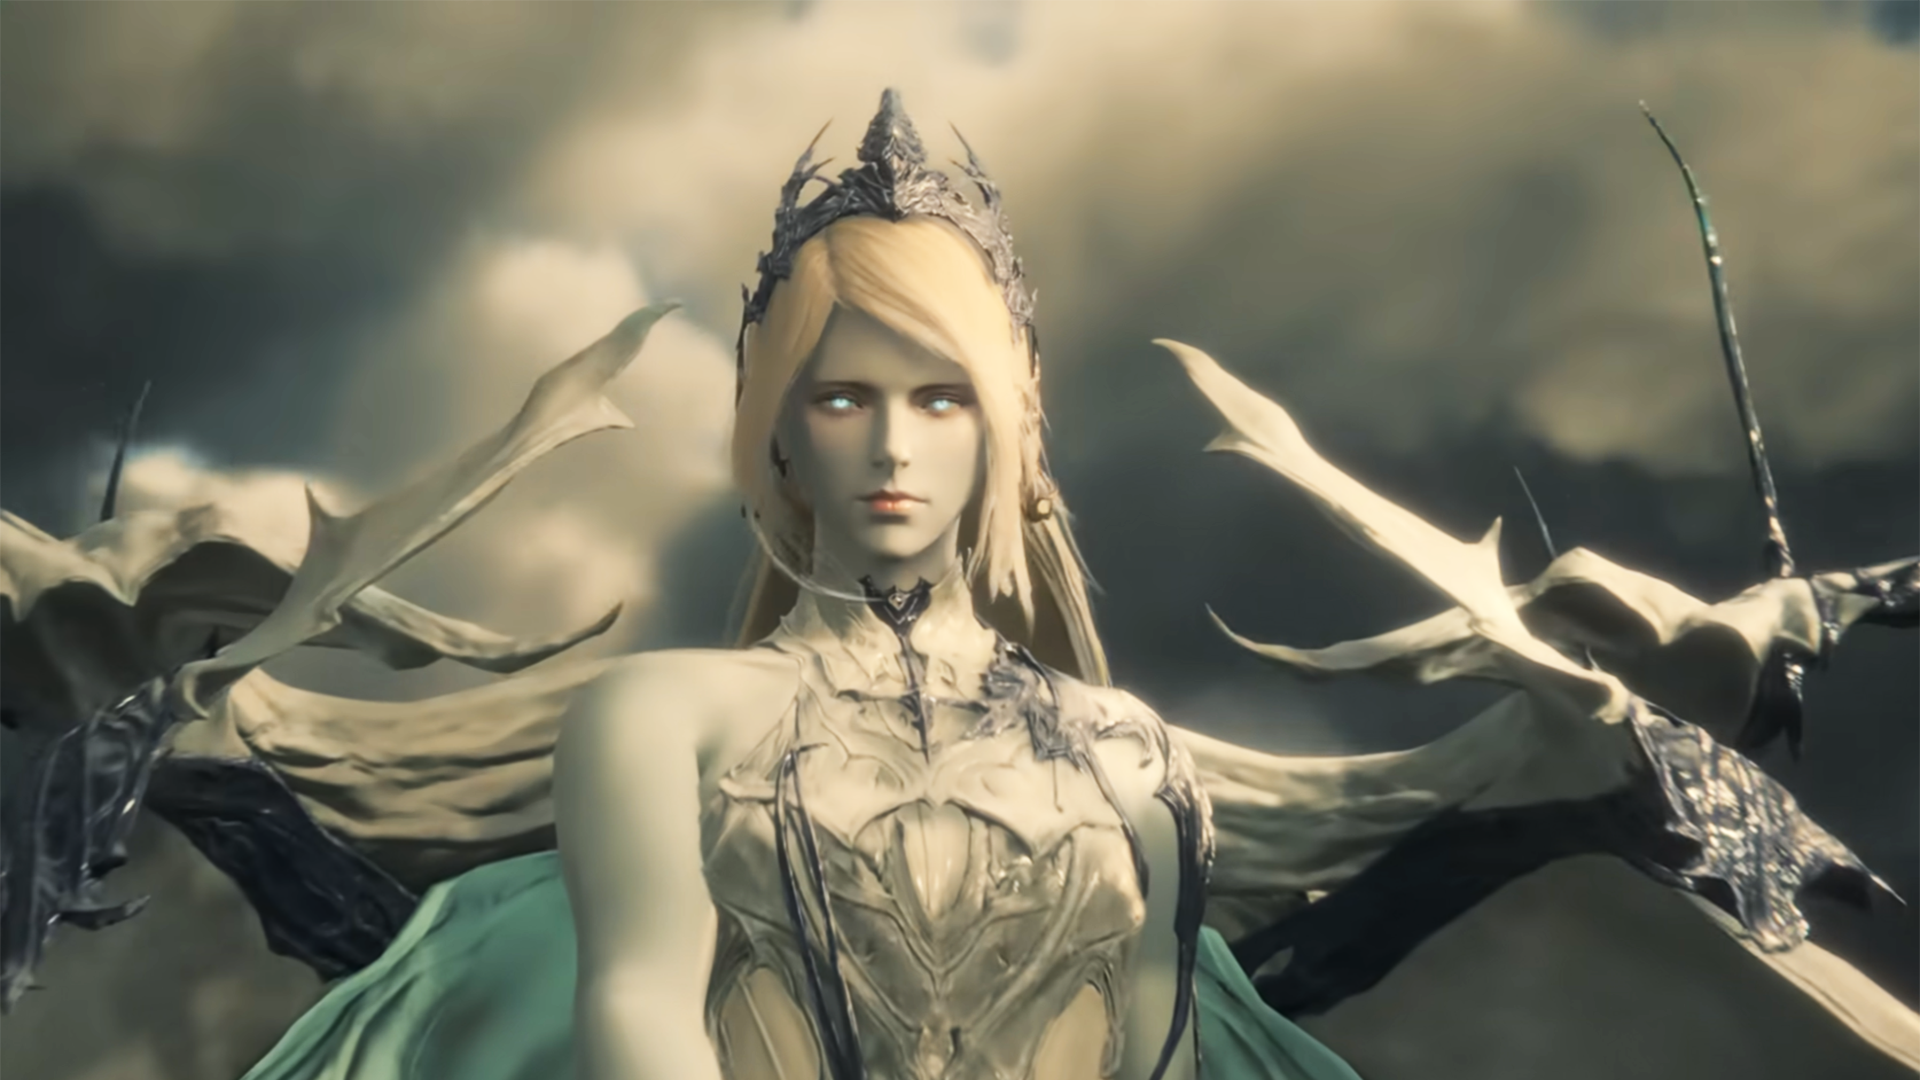 One Vogue Writer's Final Fantasy Obsession